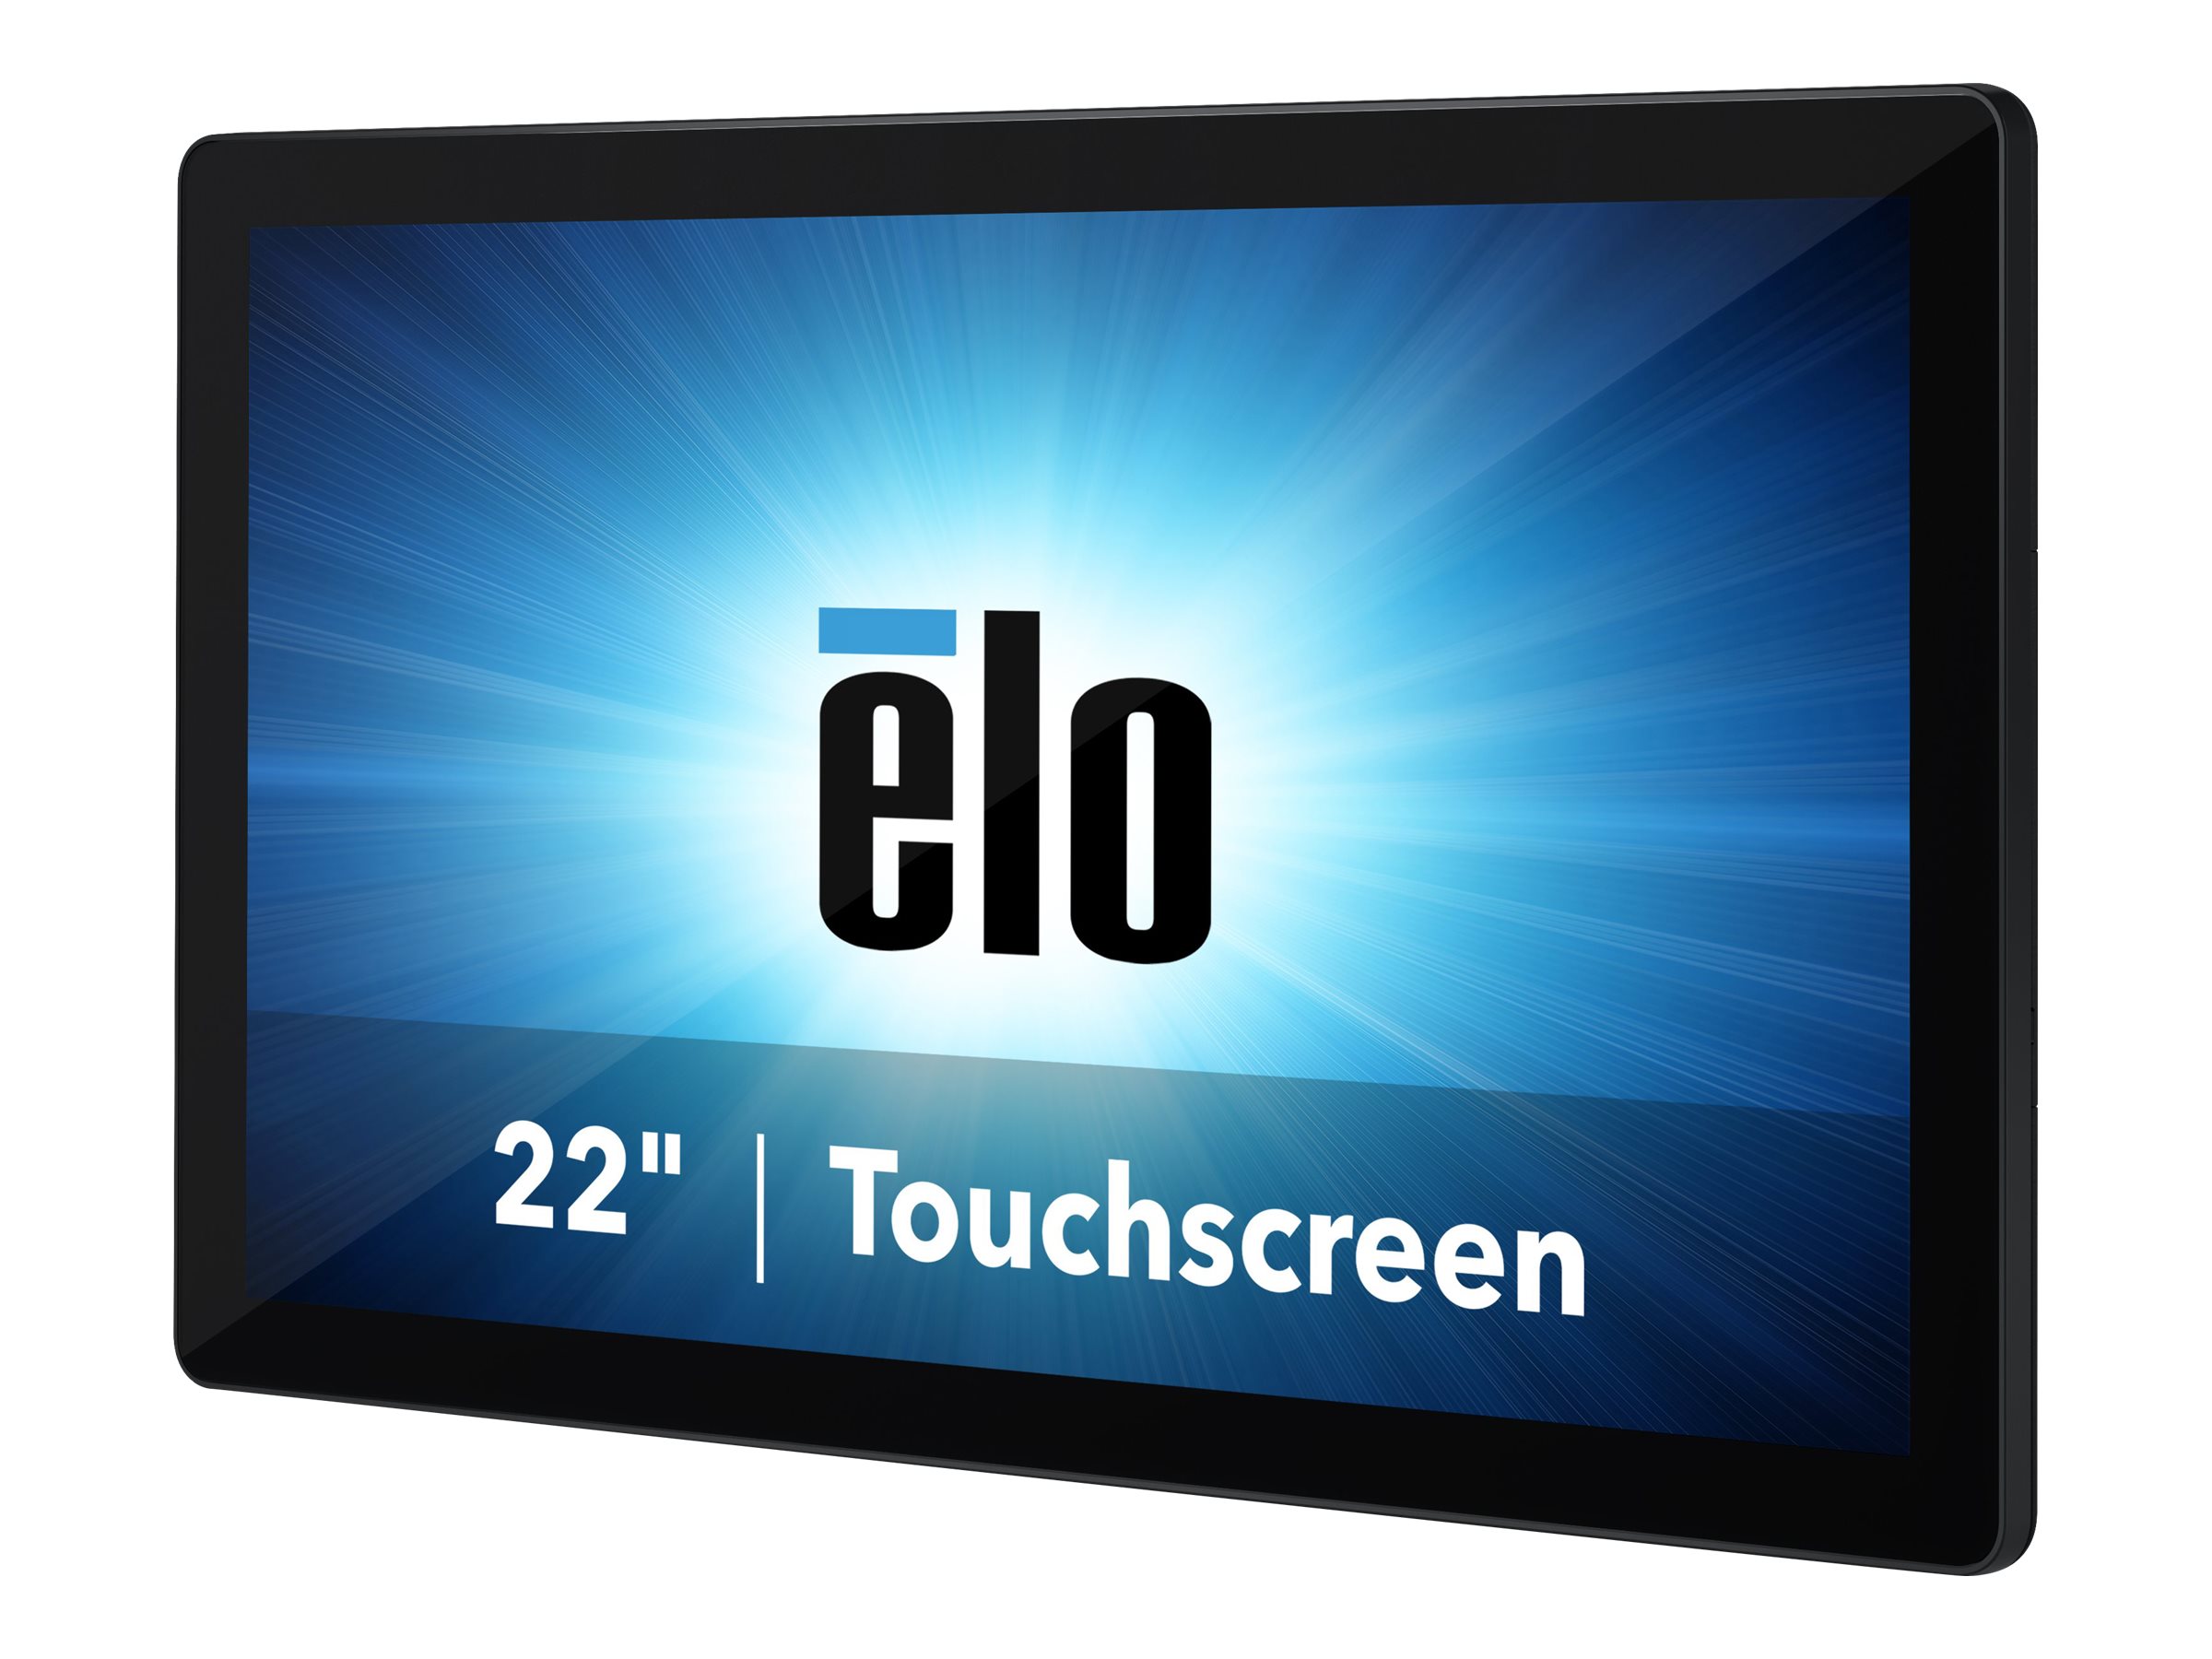 Elo Touch Solutions Elo I-Series 2.0 ESY22i3 - All-in-One (Komplettlösung) - Core i3 8100T / 3.1 GHz - RAM 8 GB - SSD 128 GB - UHD Graphics 630 - GigE - WLAN: 802.11a/b/g/n/ac, Bluetooth 5.0 - Win 10 IoT Enterprise LTSC 64-bit - Monitor: LED 54.6 cm (21.5